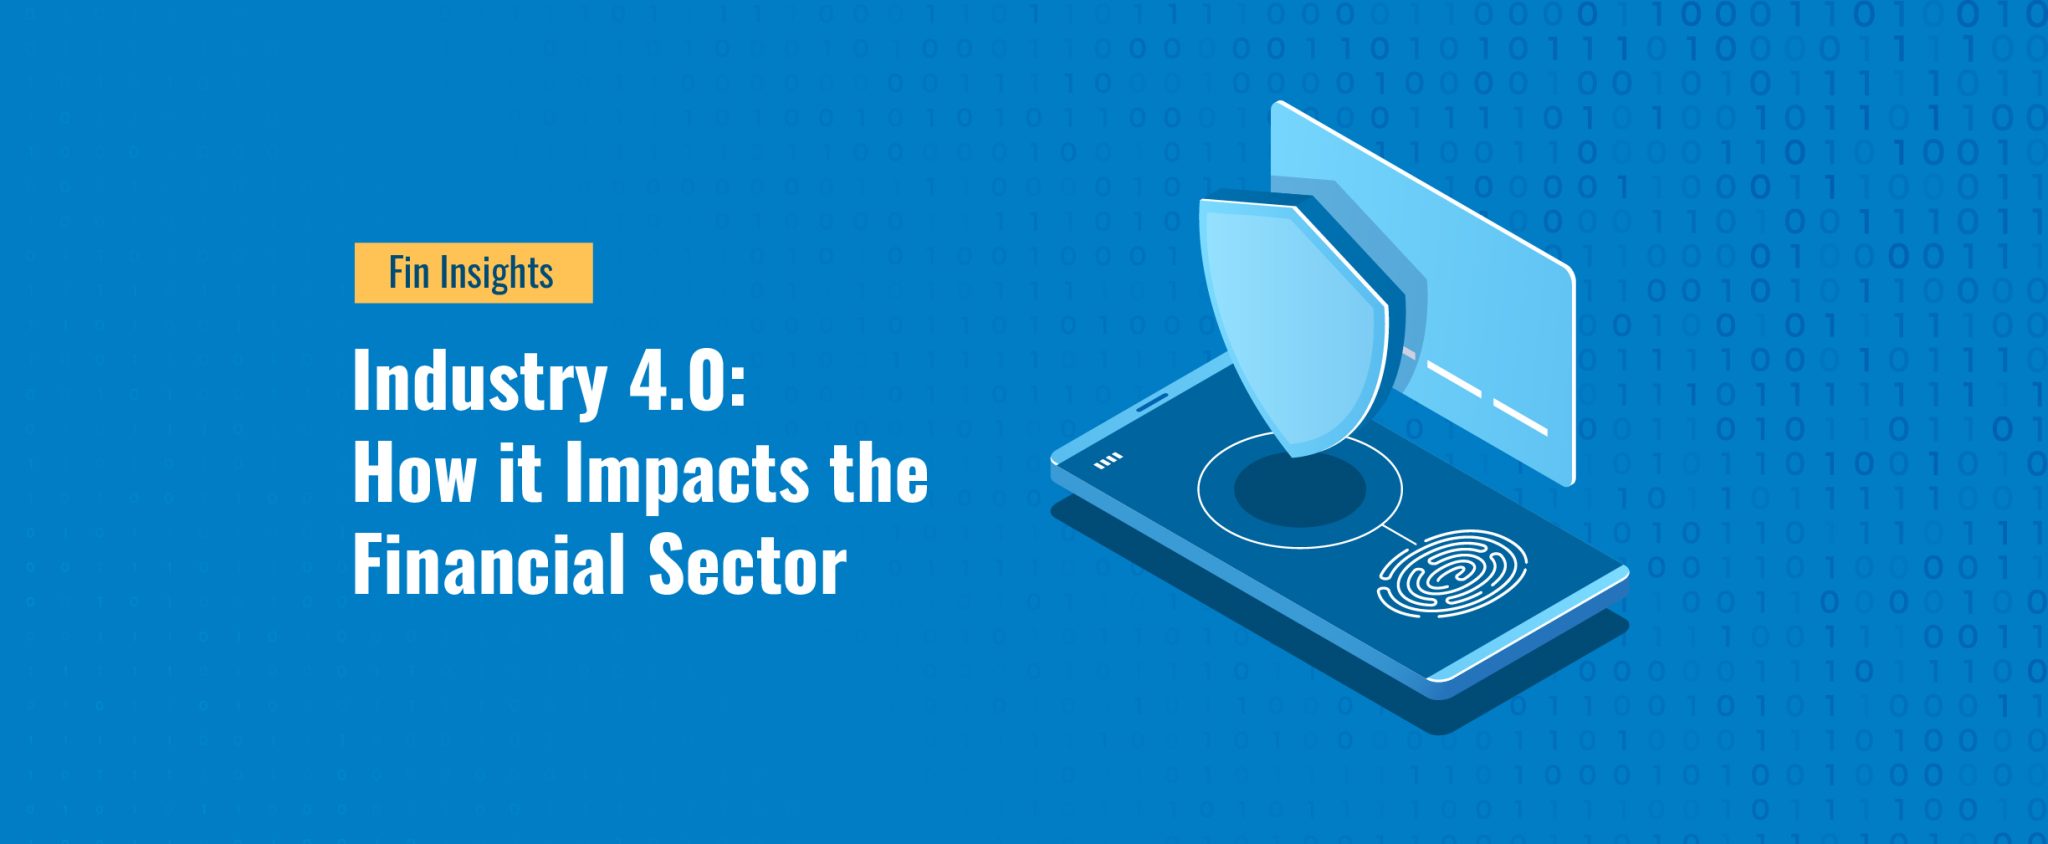 Industry 4.0: How it impacts the financial sector